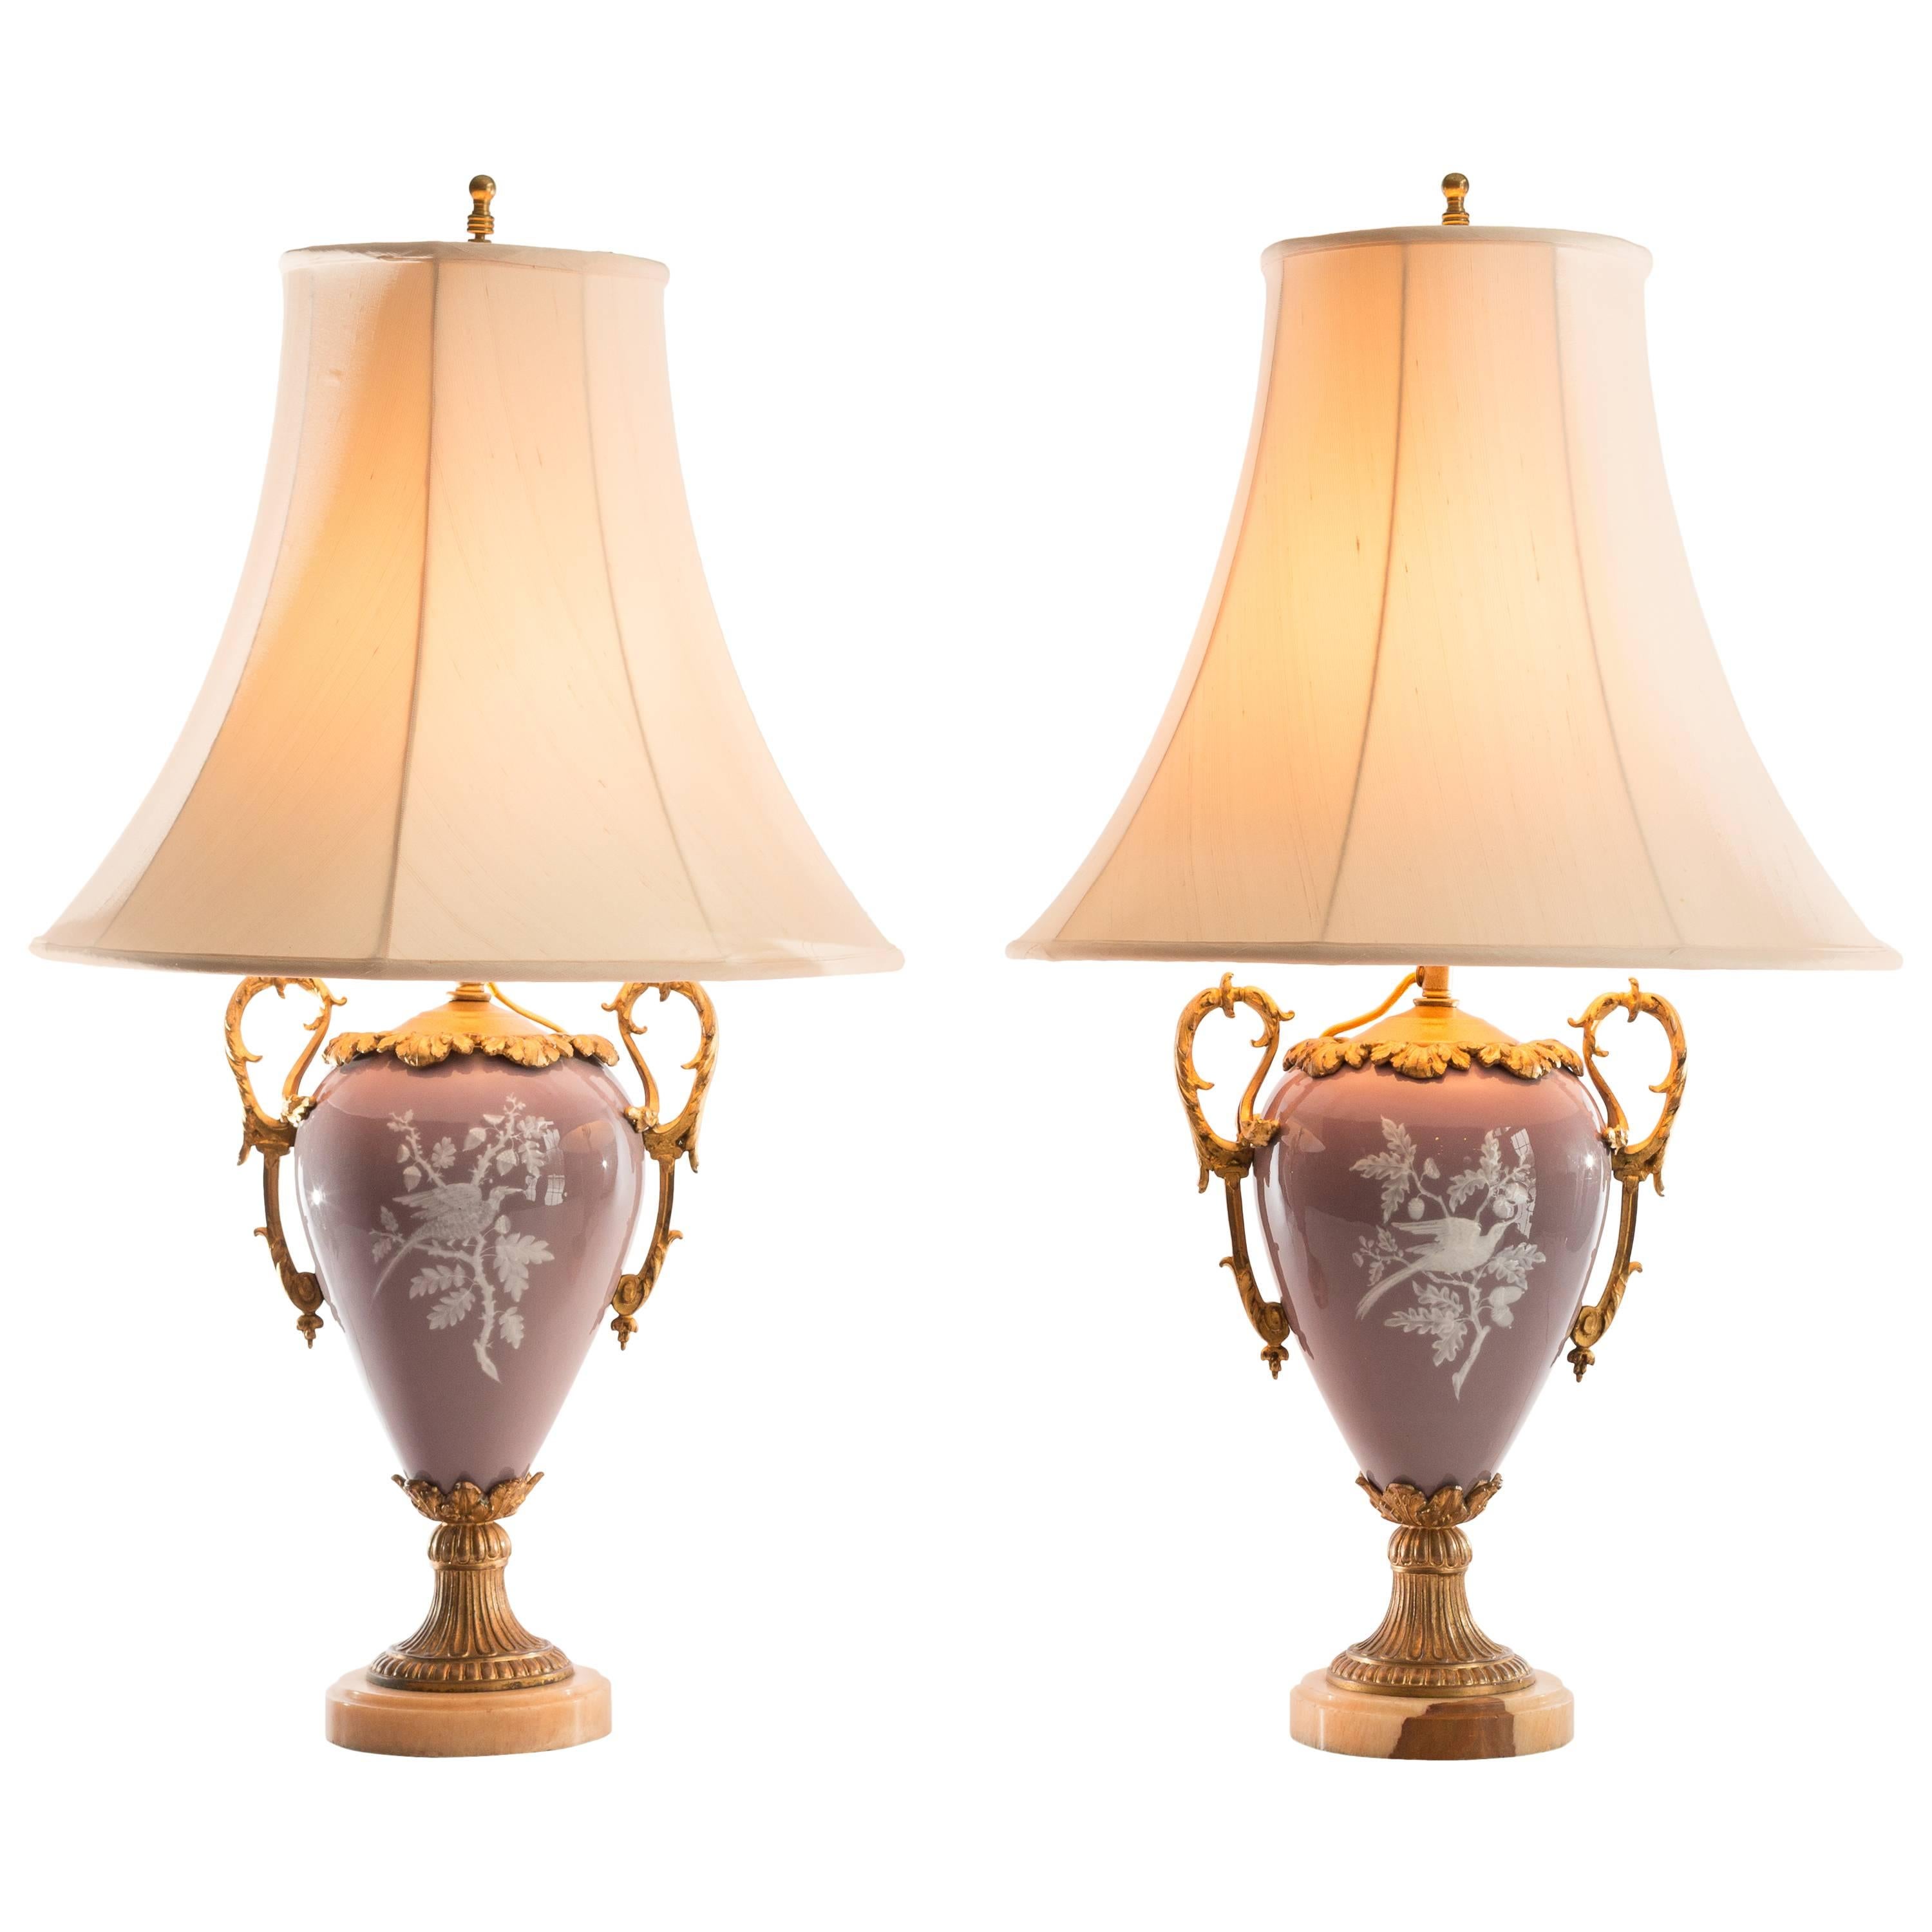 Pair of Lavender Pate-sur-pate Ceramic Lamps with Cupid Design, Silk Shades For Sale